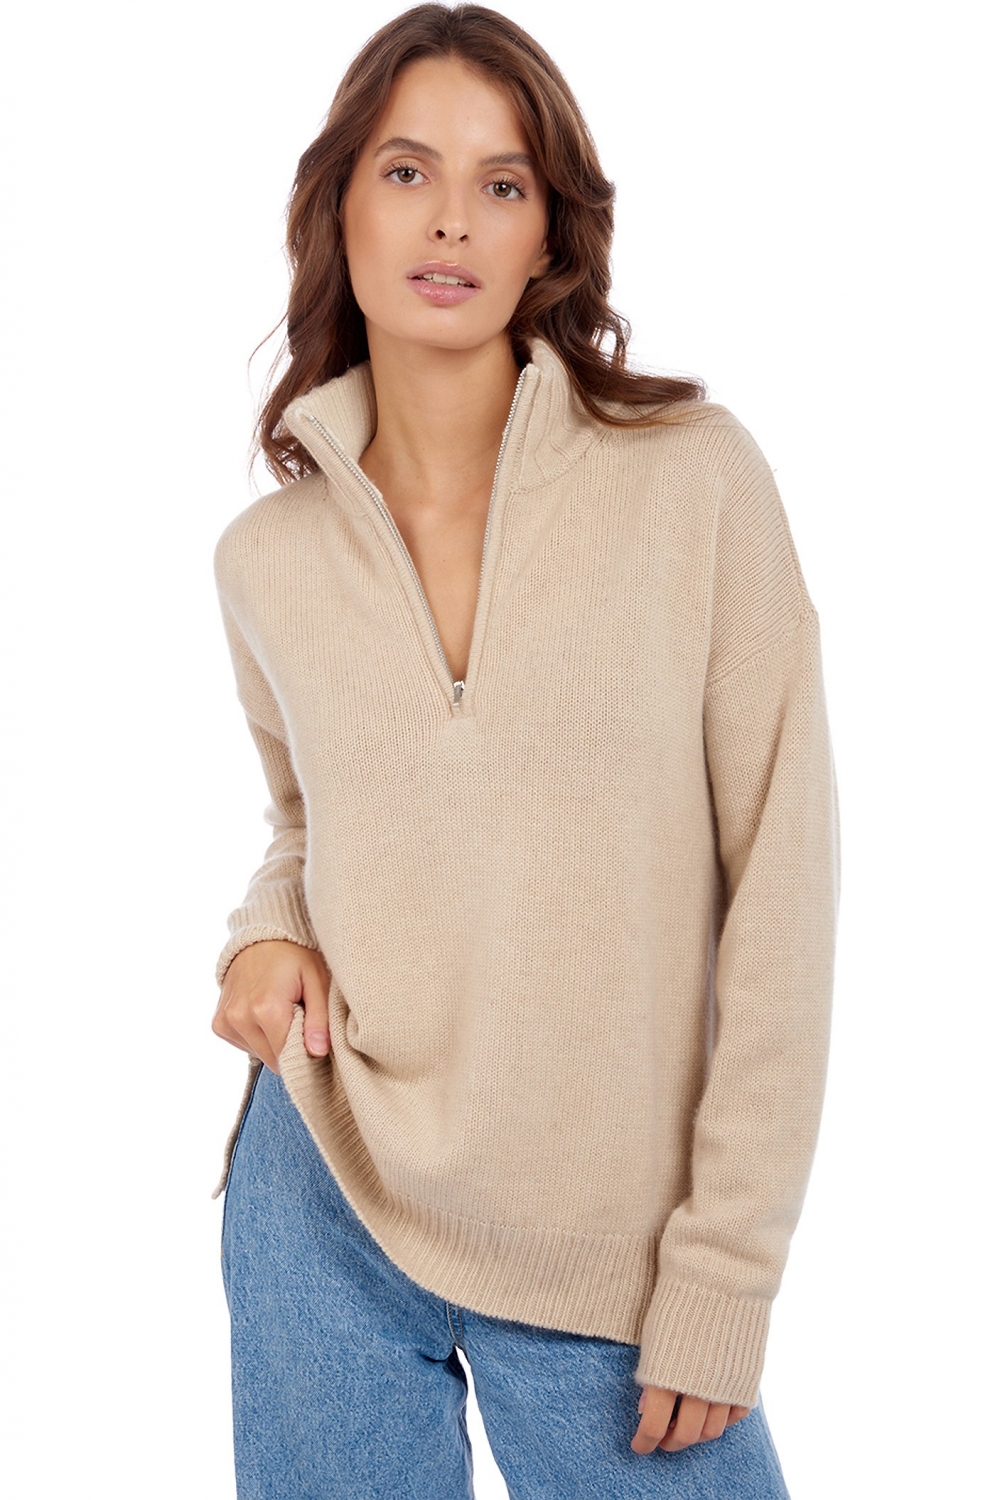 Cashmere ladies chunky sweater alizette natural beige 3xl